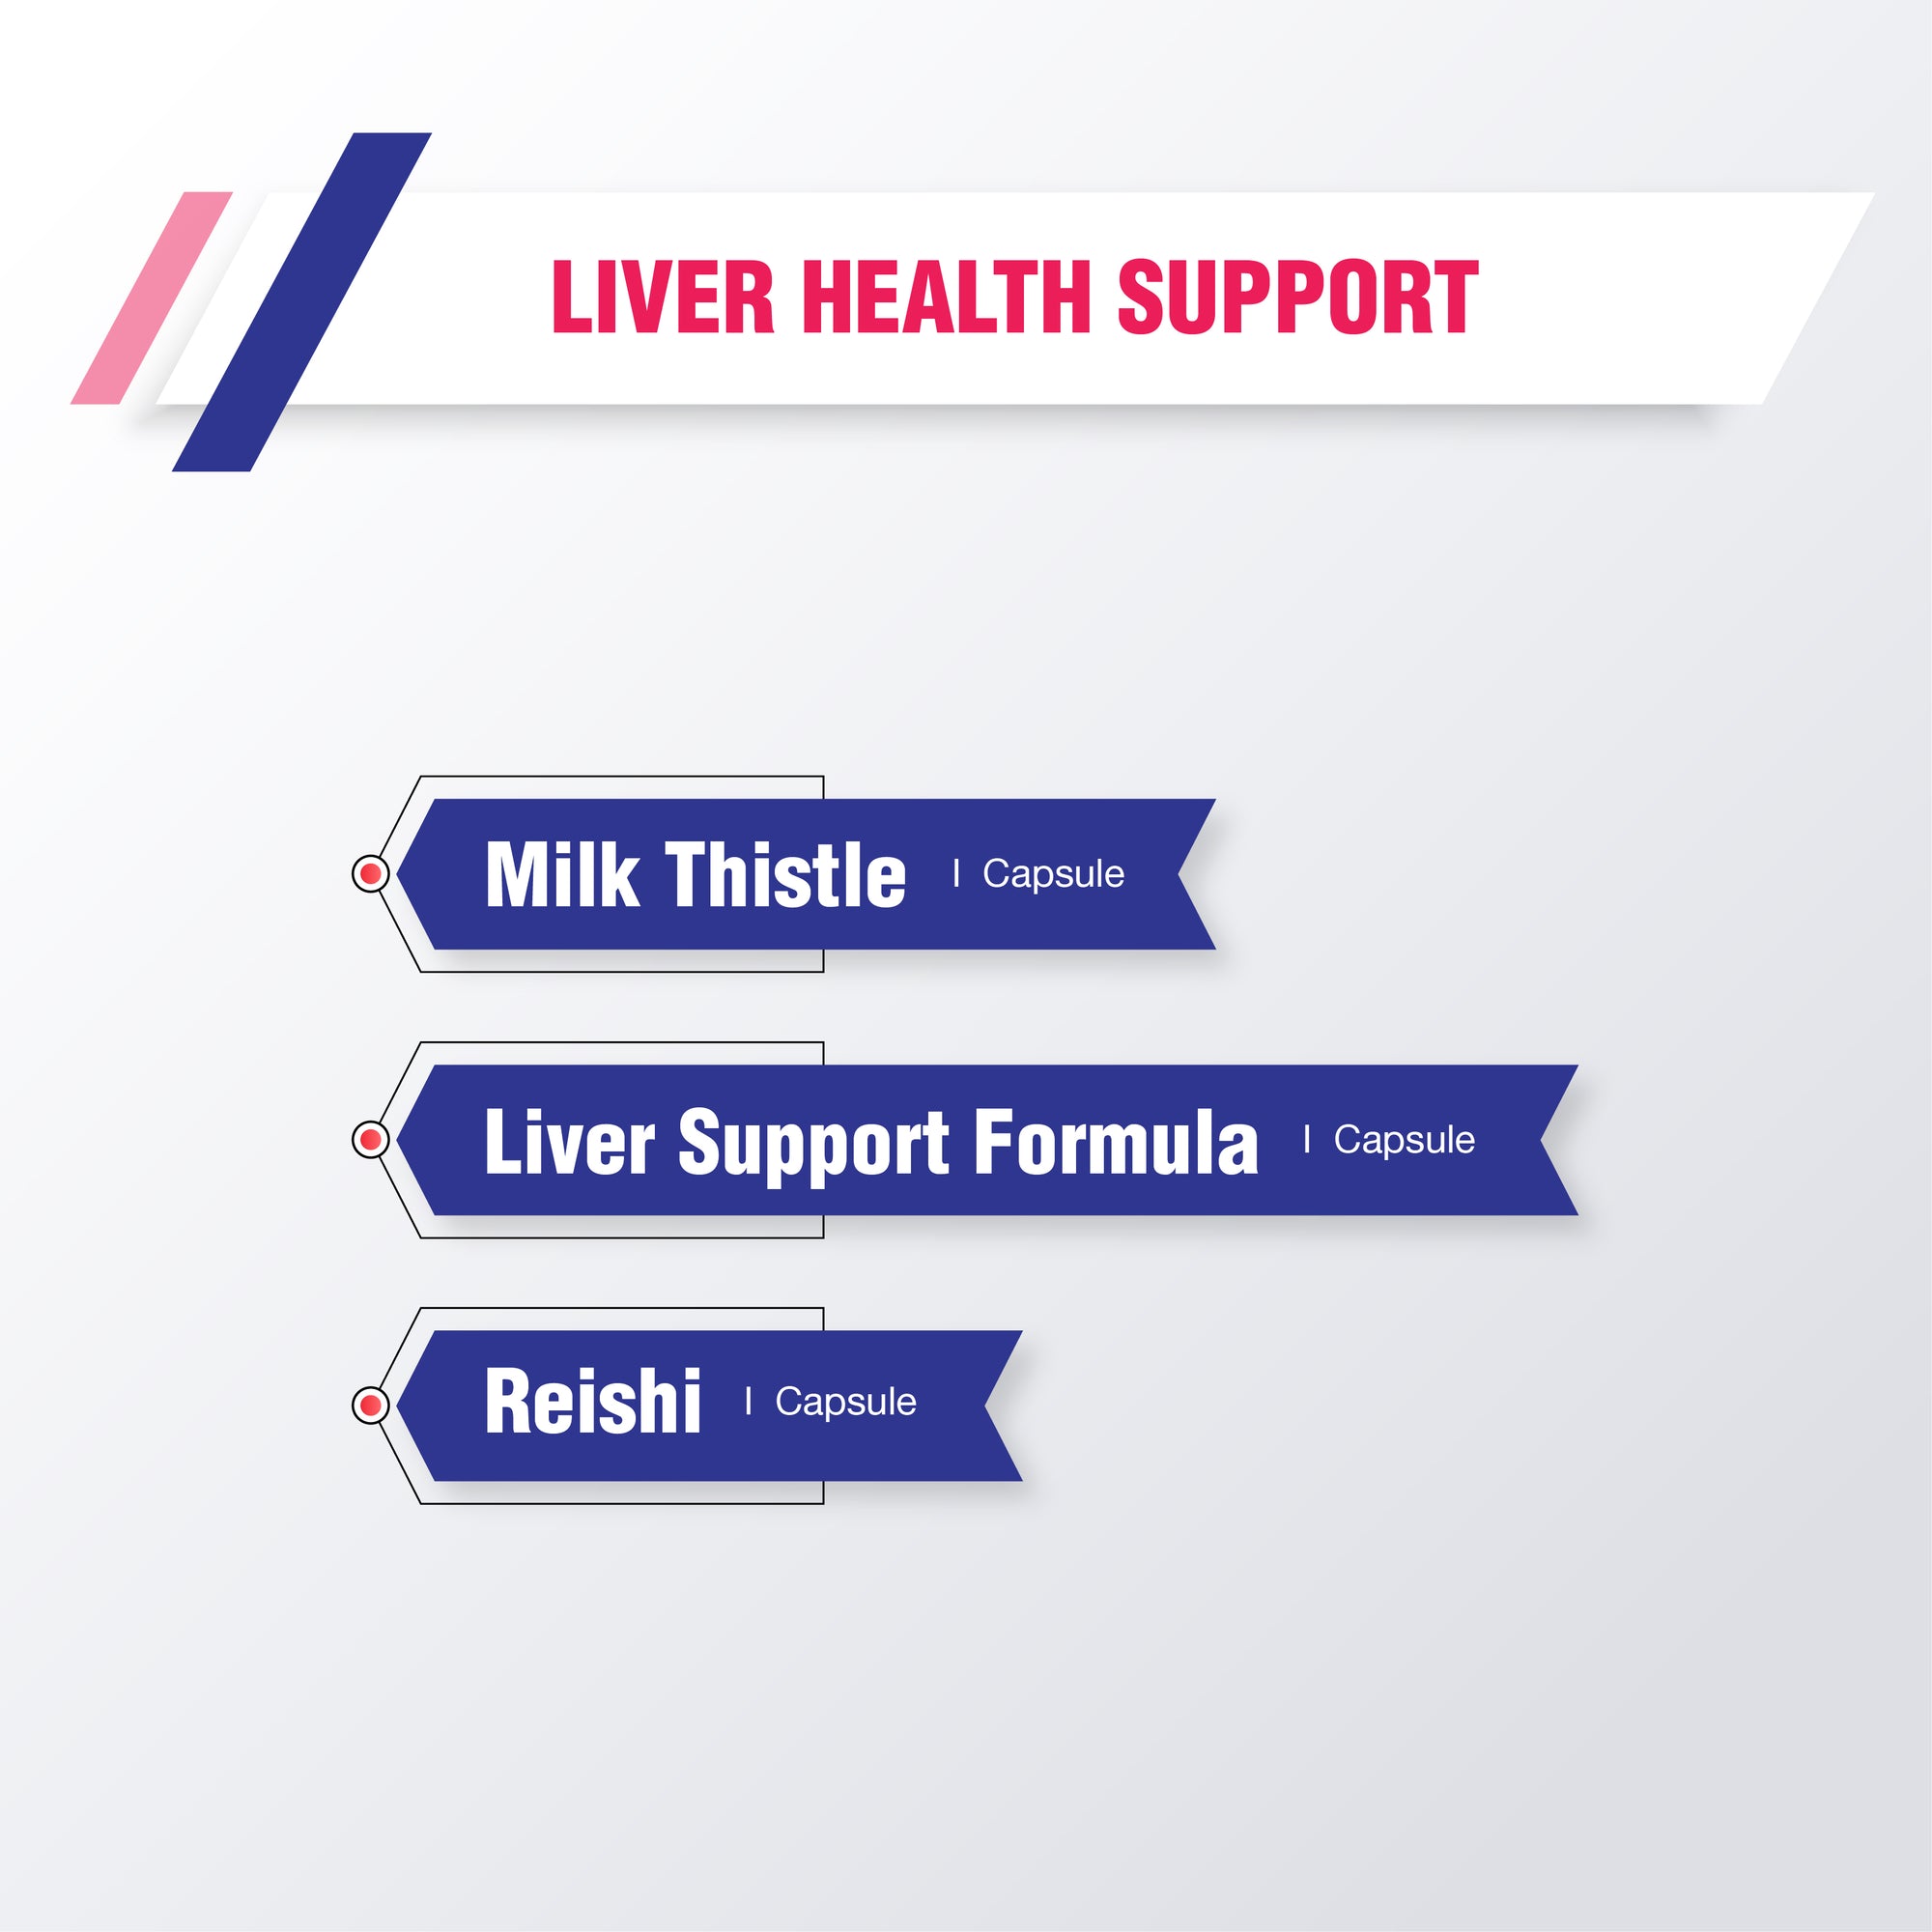 Liver Health support